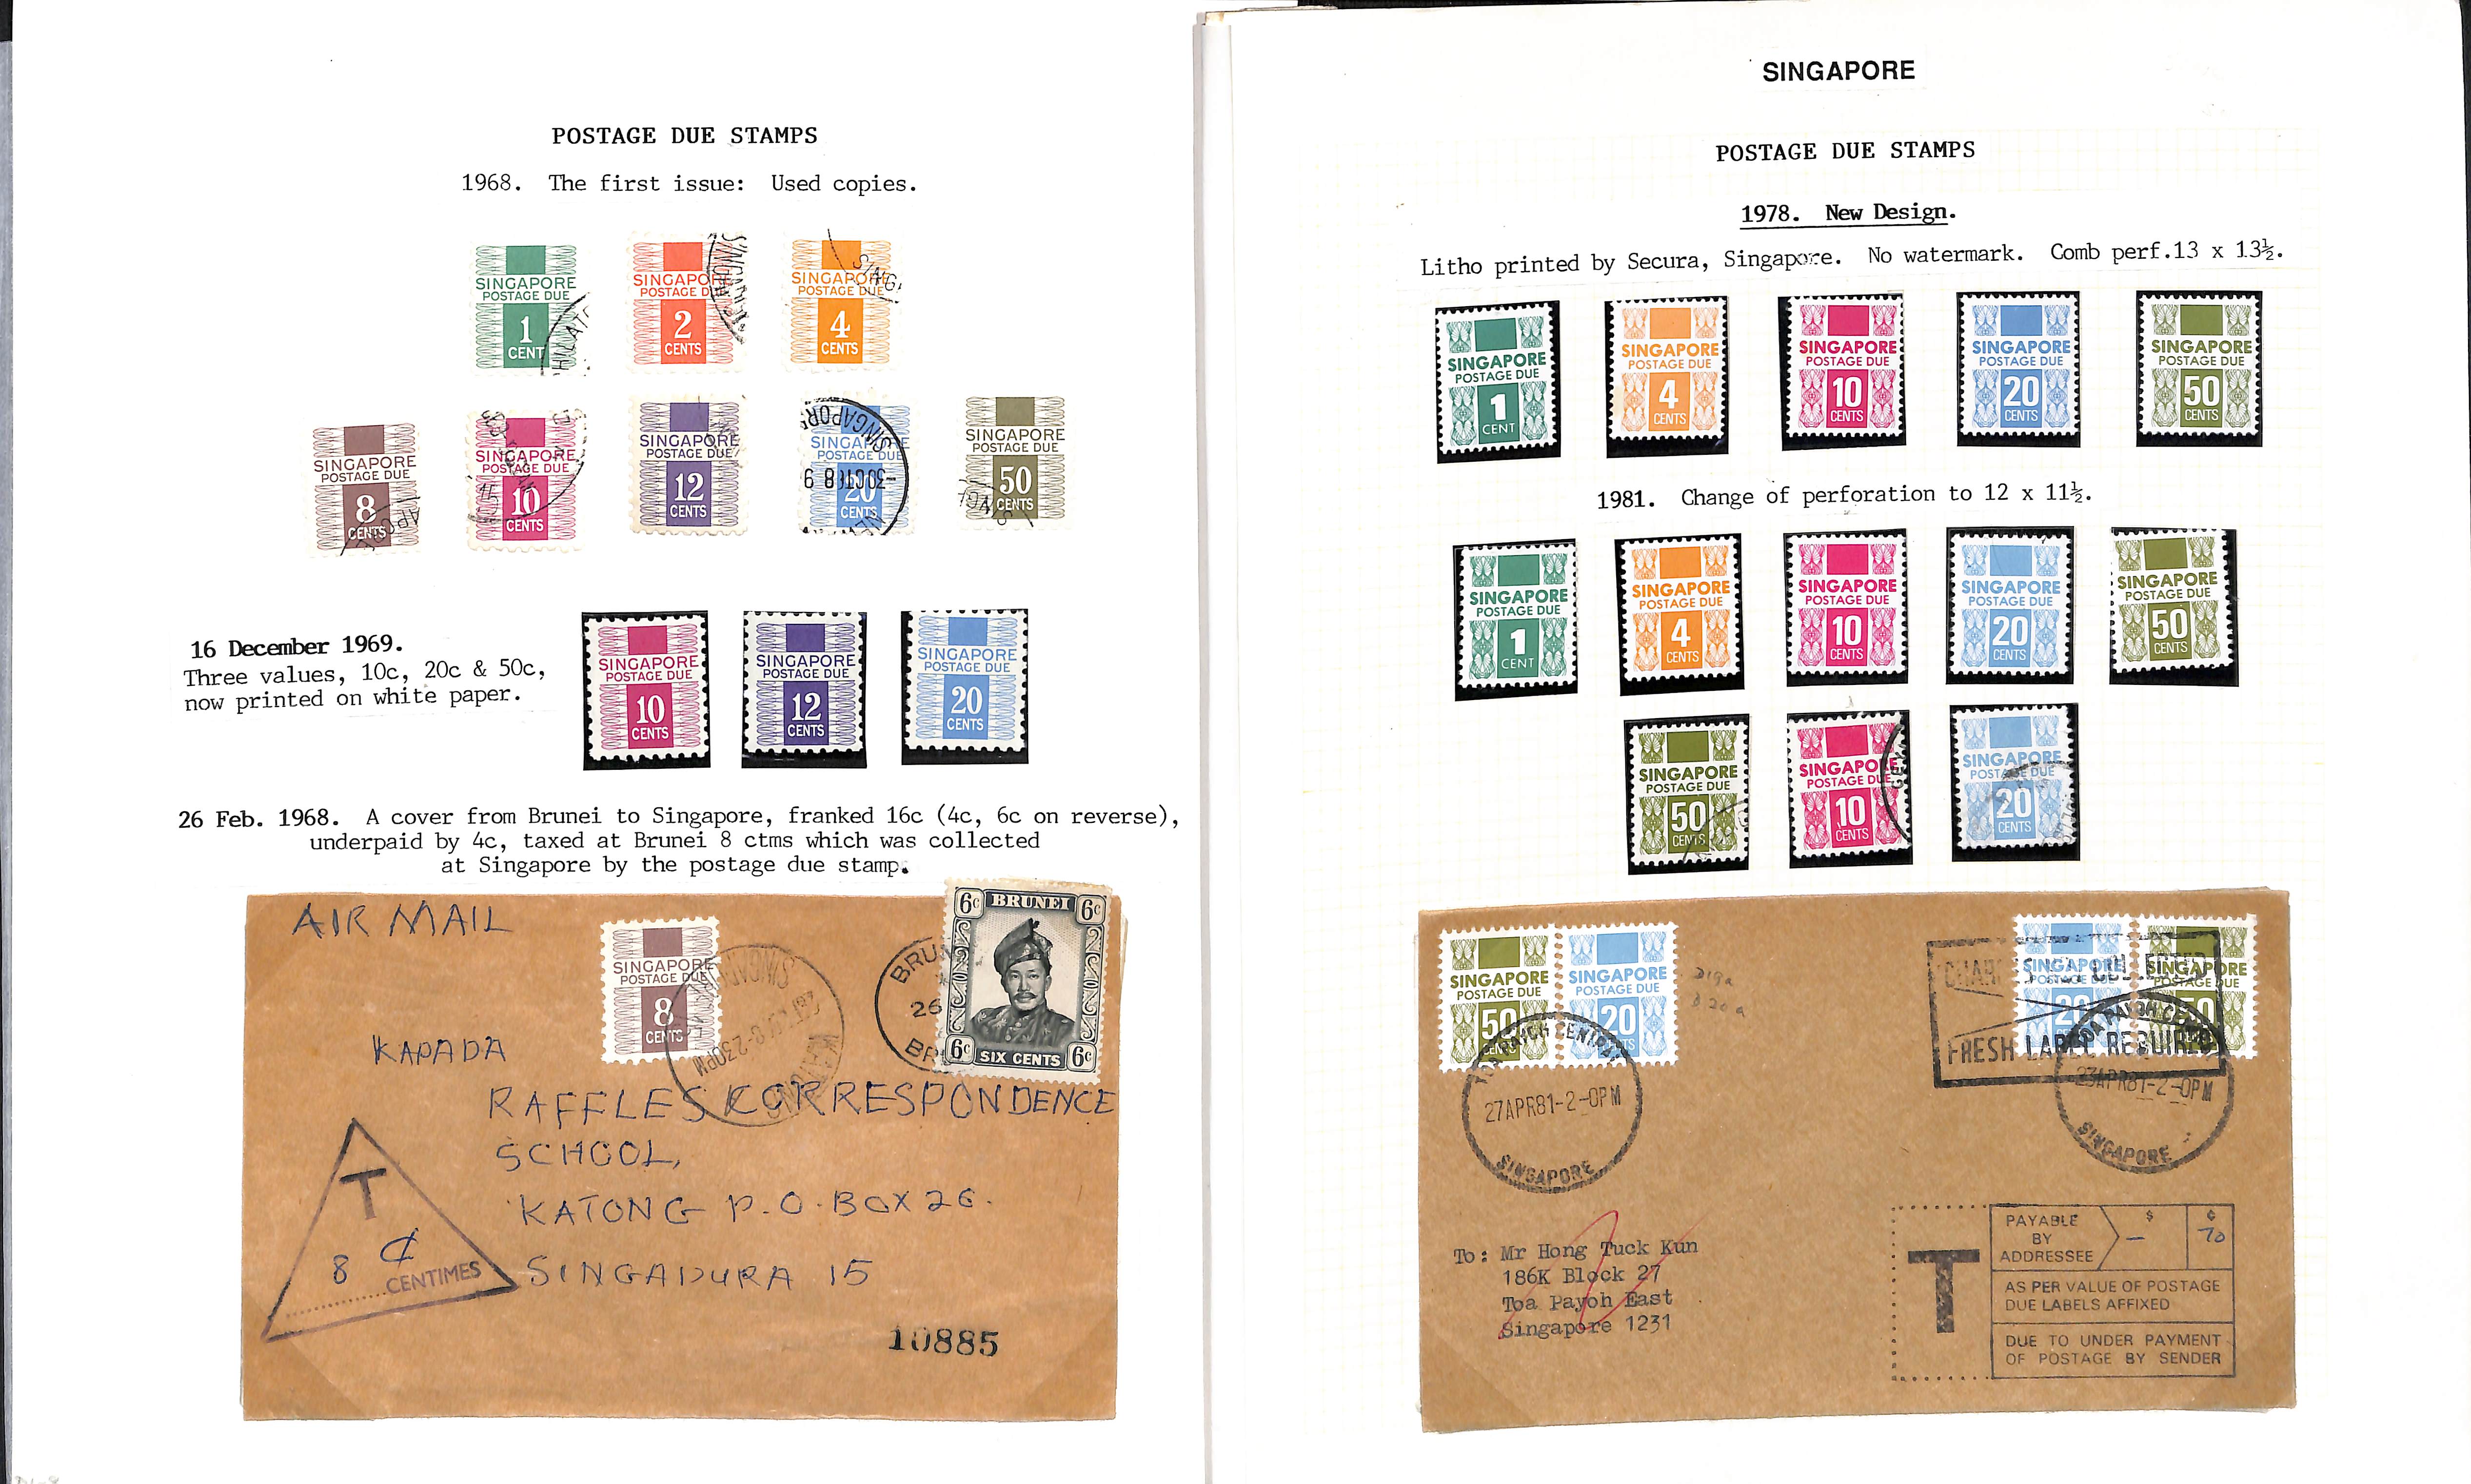 Postage Dues. 1968-95 Mint and used study including covers (9), 1968 1c - 4c sheets, etc. (399). - Image 4 of 6